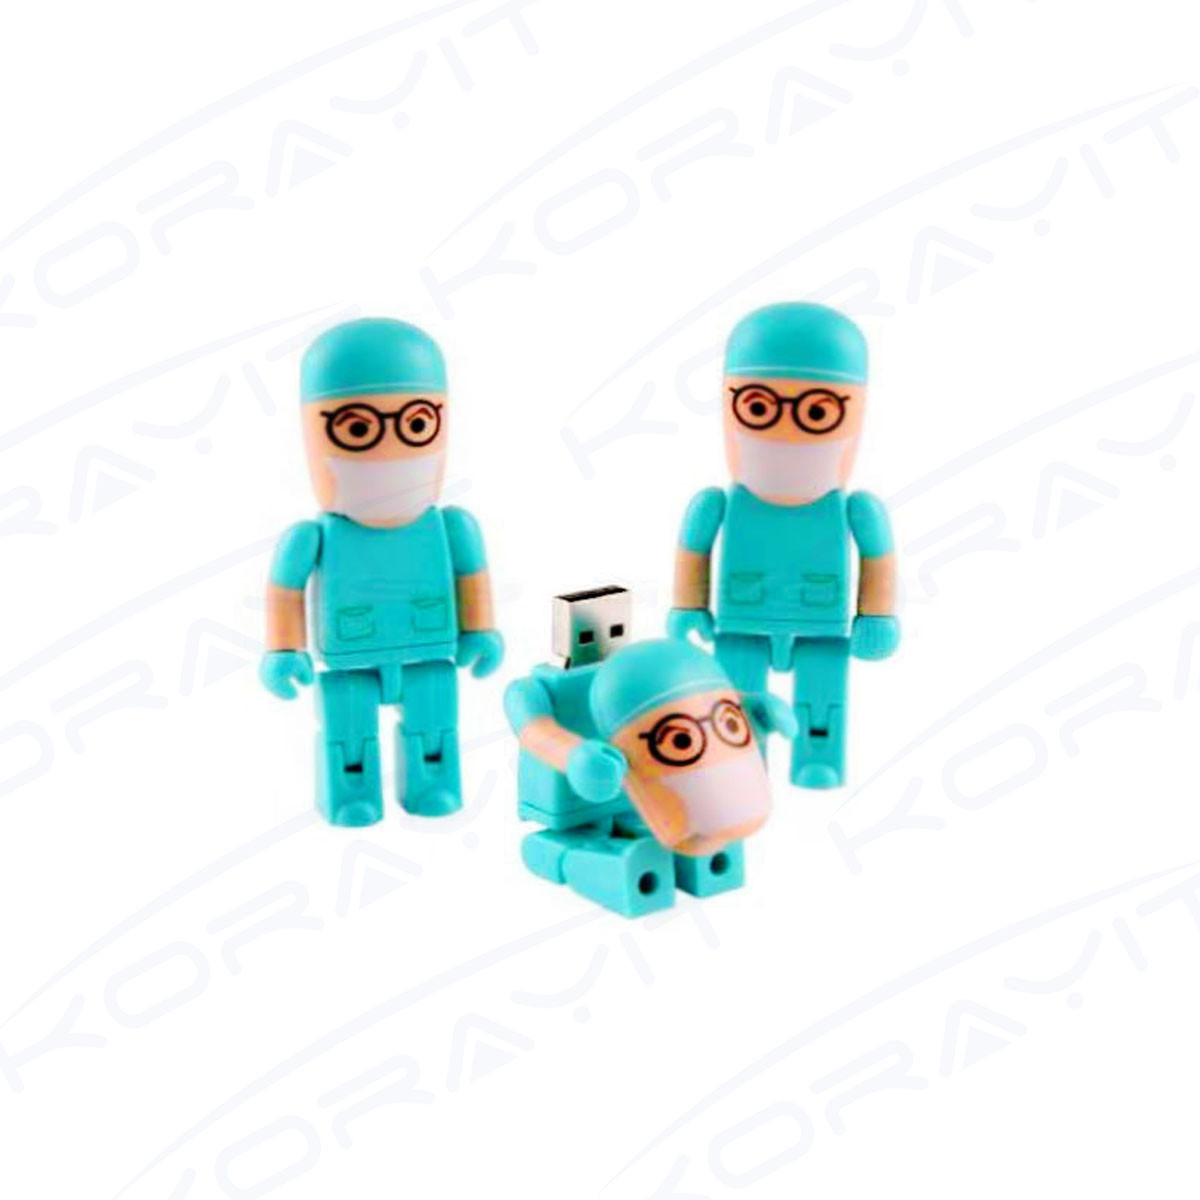 China Doctor Plastic USB Flash Drive, Hospital Promotion Doctor Memory Stick Custom Gifts wholesale